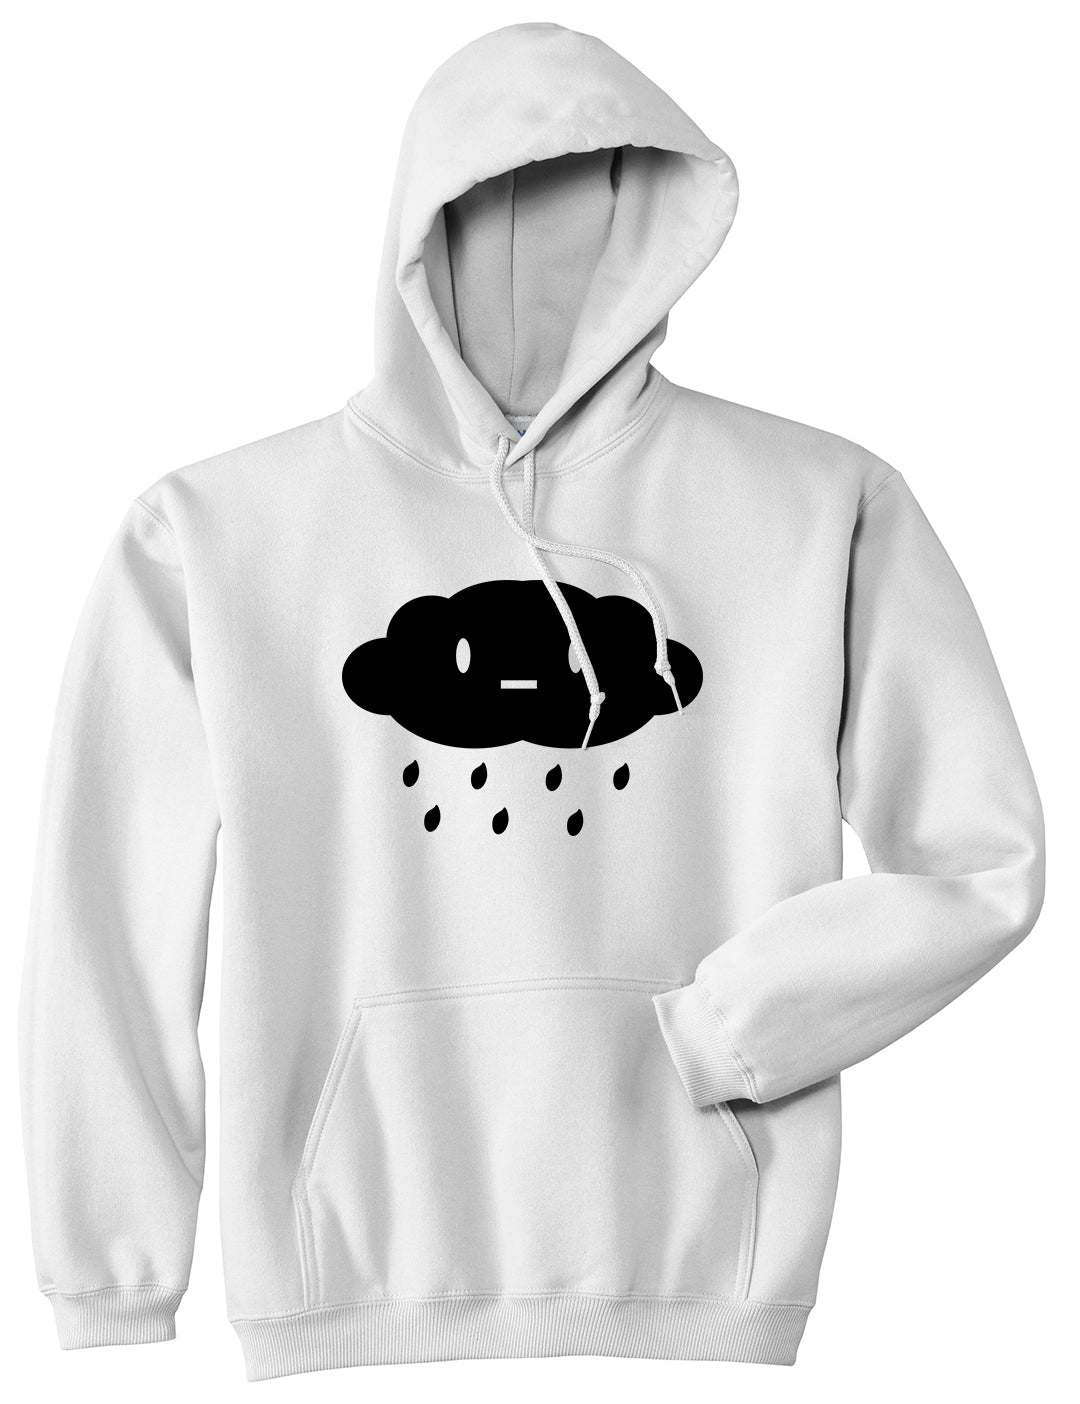 Cute Face Rain Cloud White Pullover Hoodie by Kings Of NY